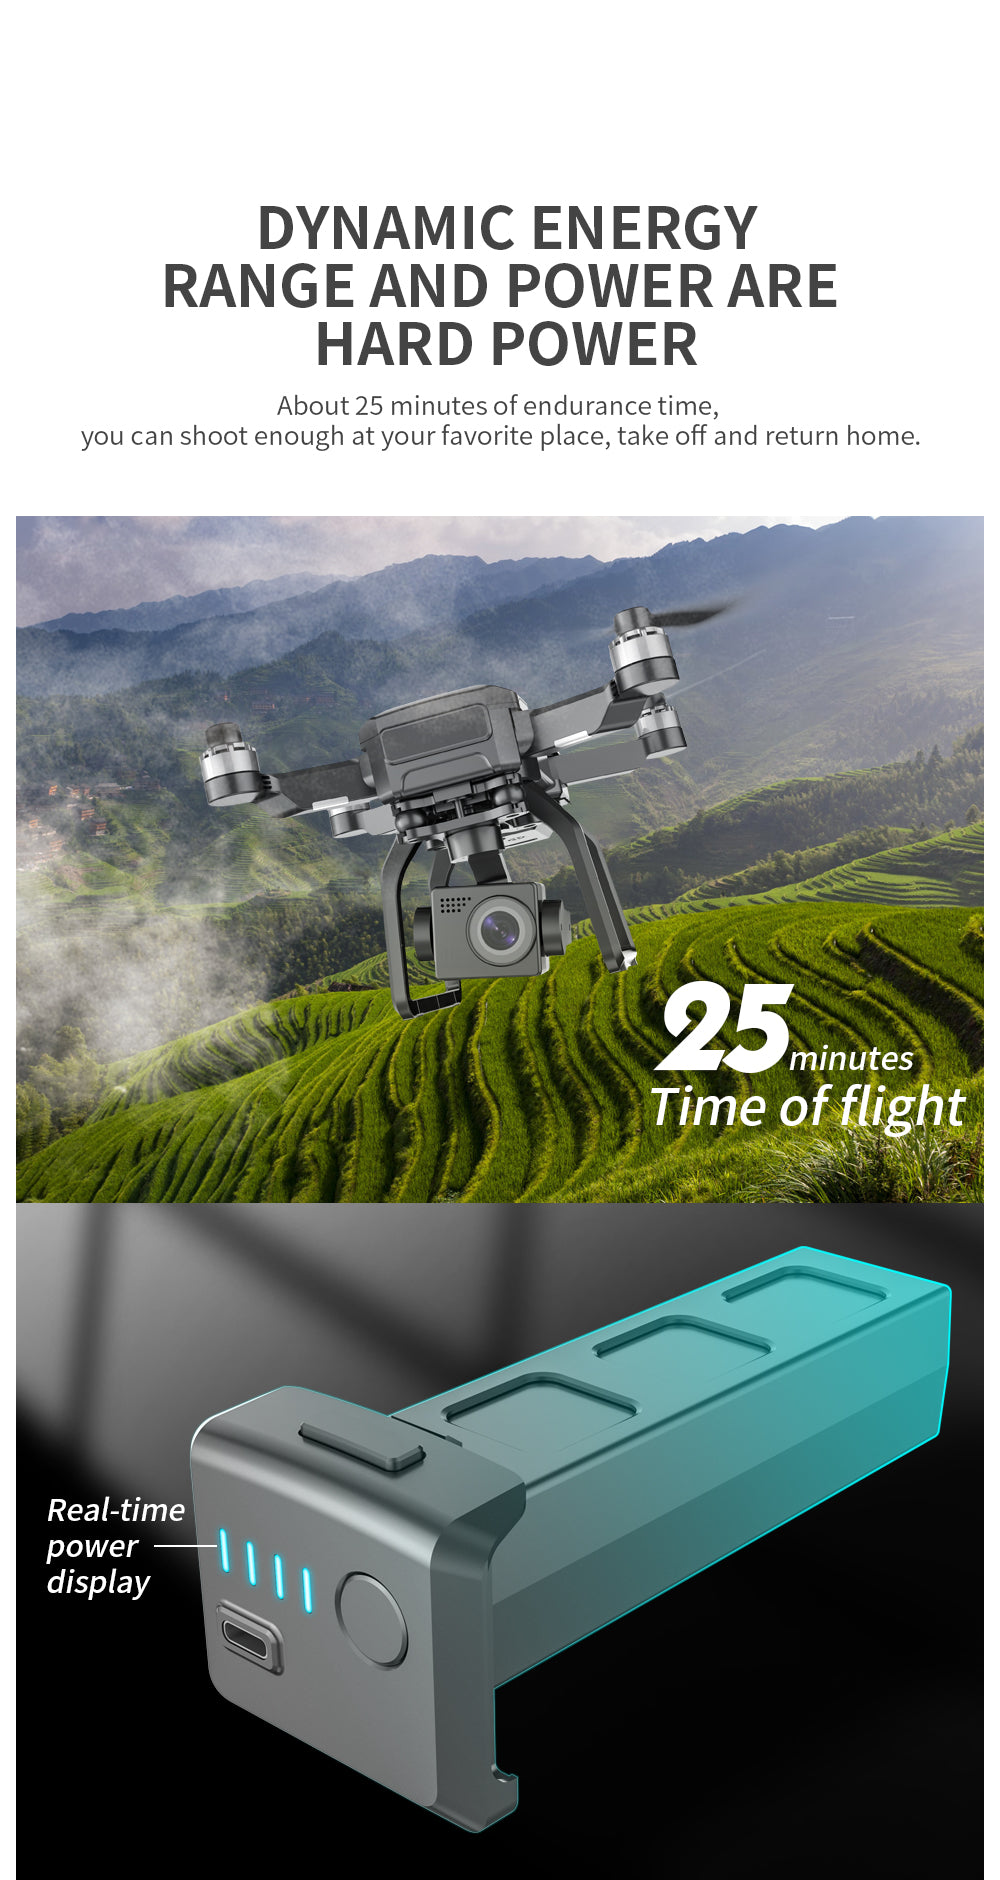 SJRC F7 PRO / F7S Pro Drone, DYNAMIC ENERGY RANGE AND POWER ARE HARD 